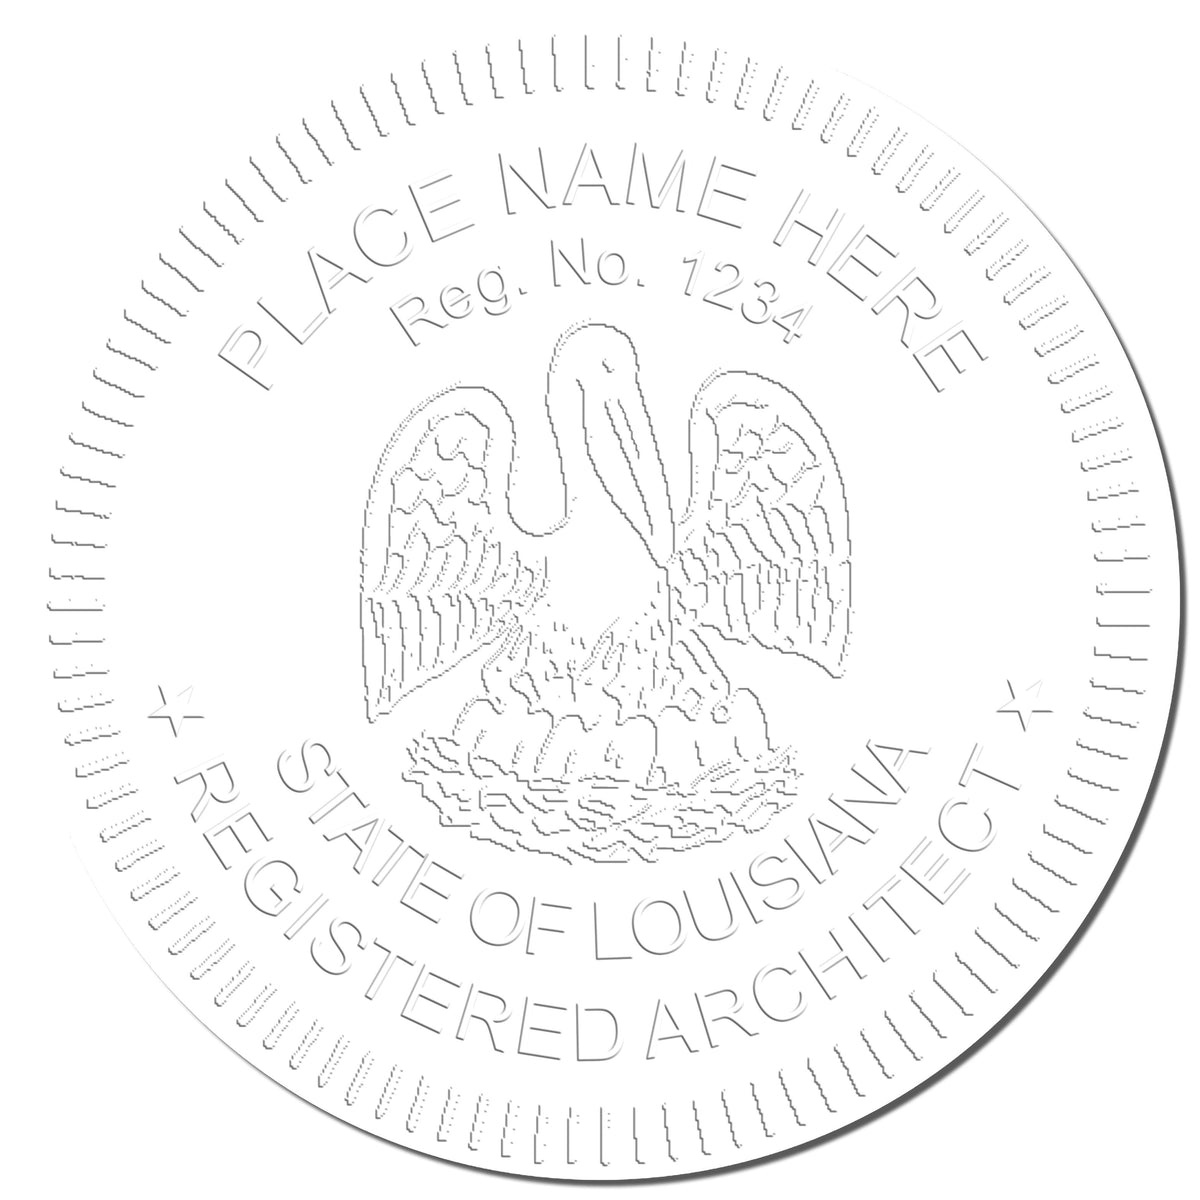 A photograph of the Extended Long Reach Louisiana Architect Seal Embosser stamp impression reveals a vivid, professional image of the on paper.